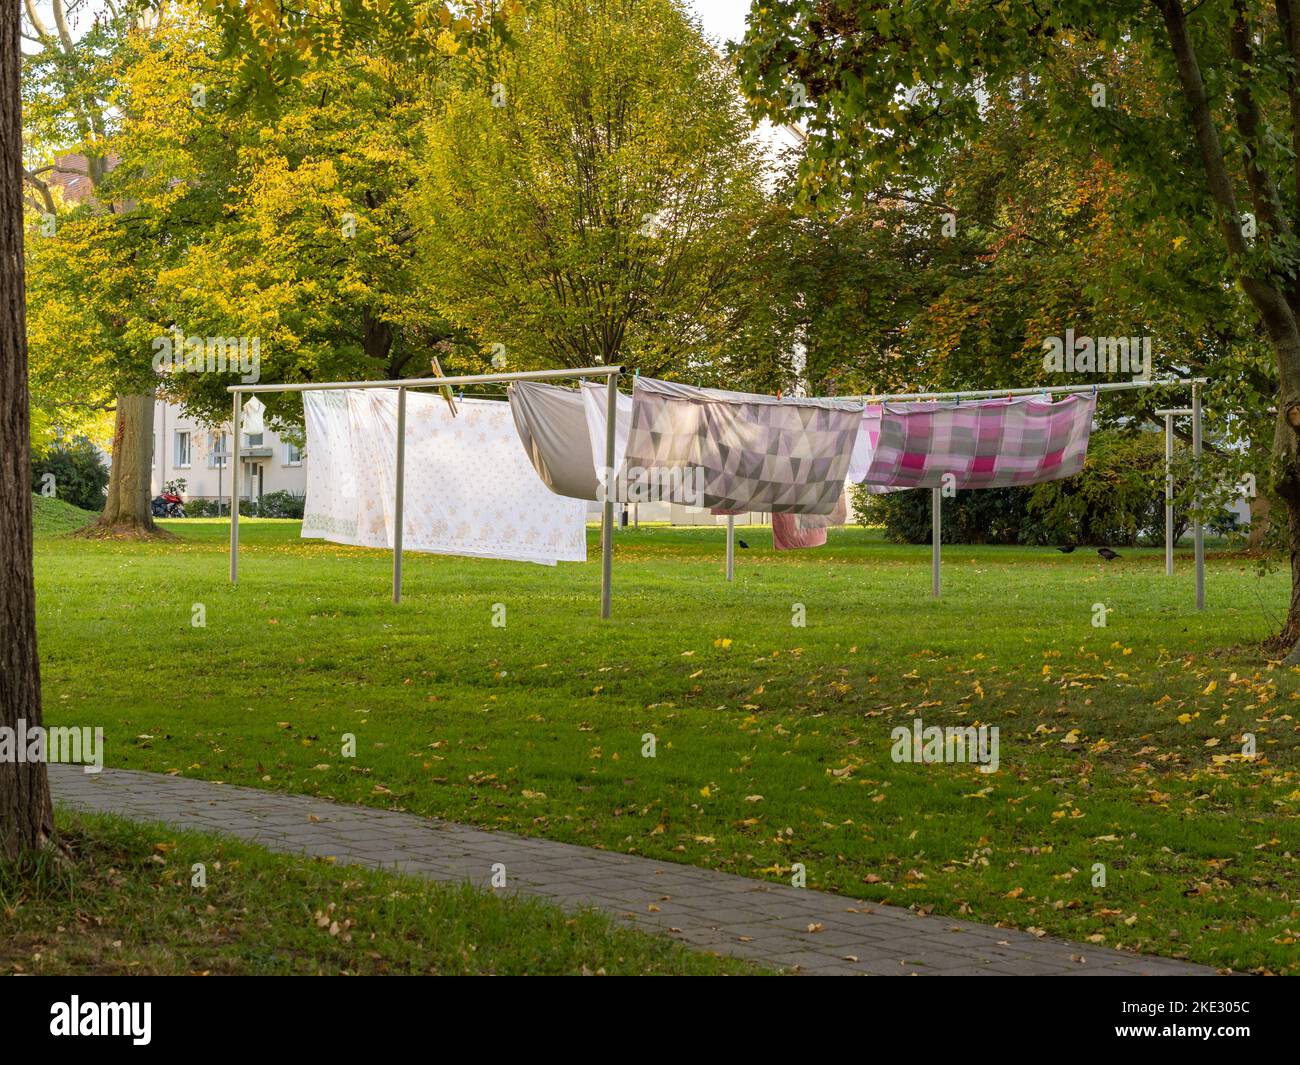 Laundry hanging on a clothesline in a backyard. Bed sheets and blankets drying outdoor in the wind. Housekeeping in a residential district. Stock Photo